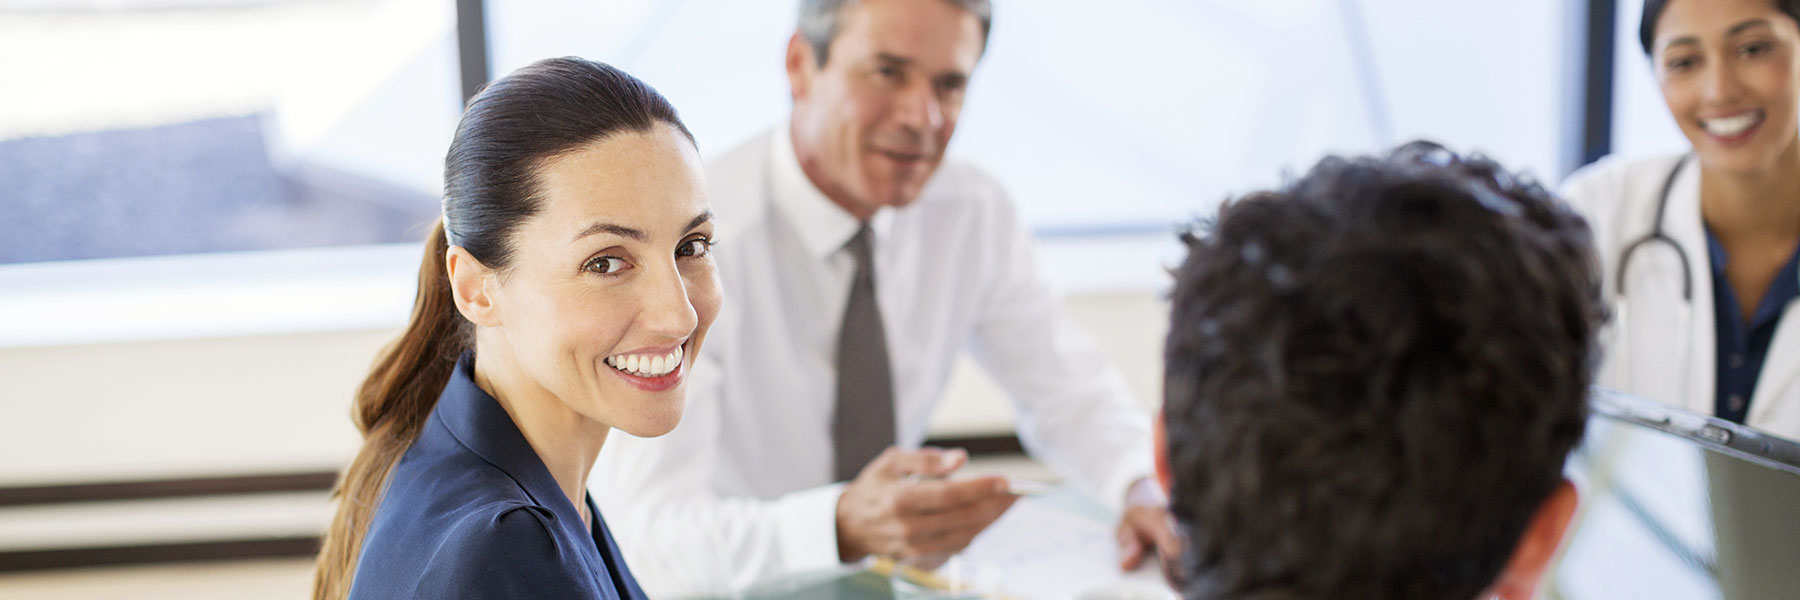 hospital administrator smiling during conference table meeting